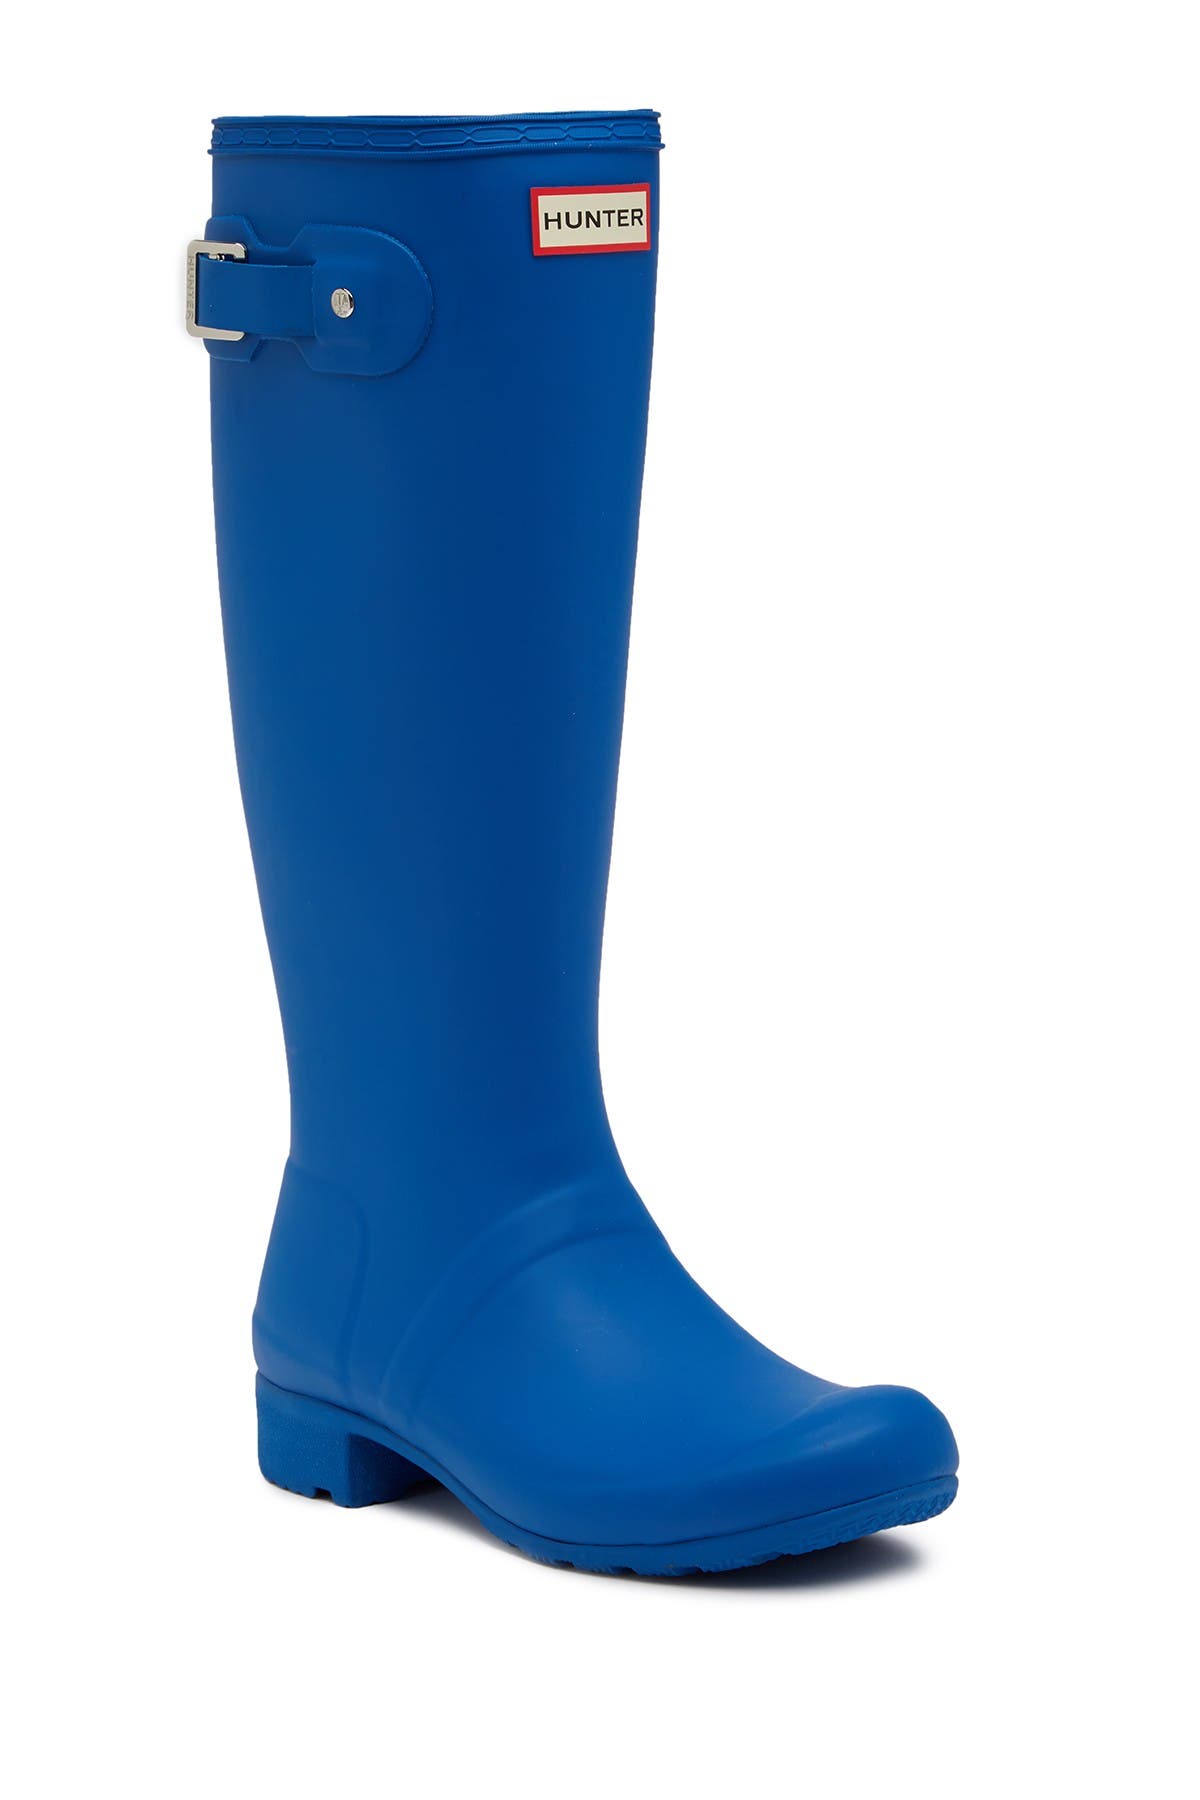 nordstrom hunter boots womens